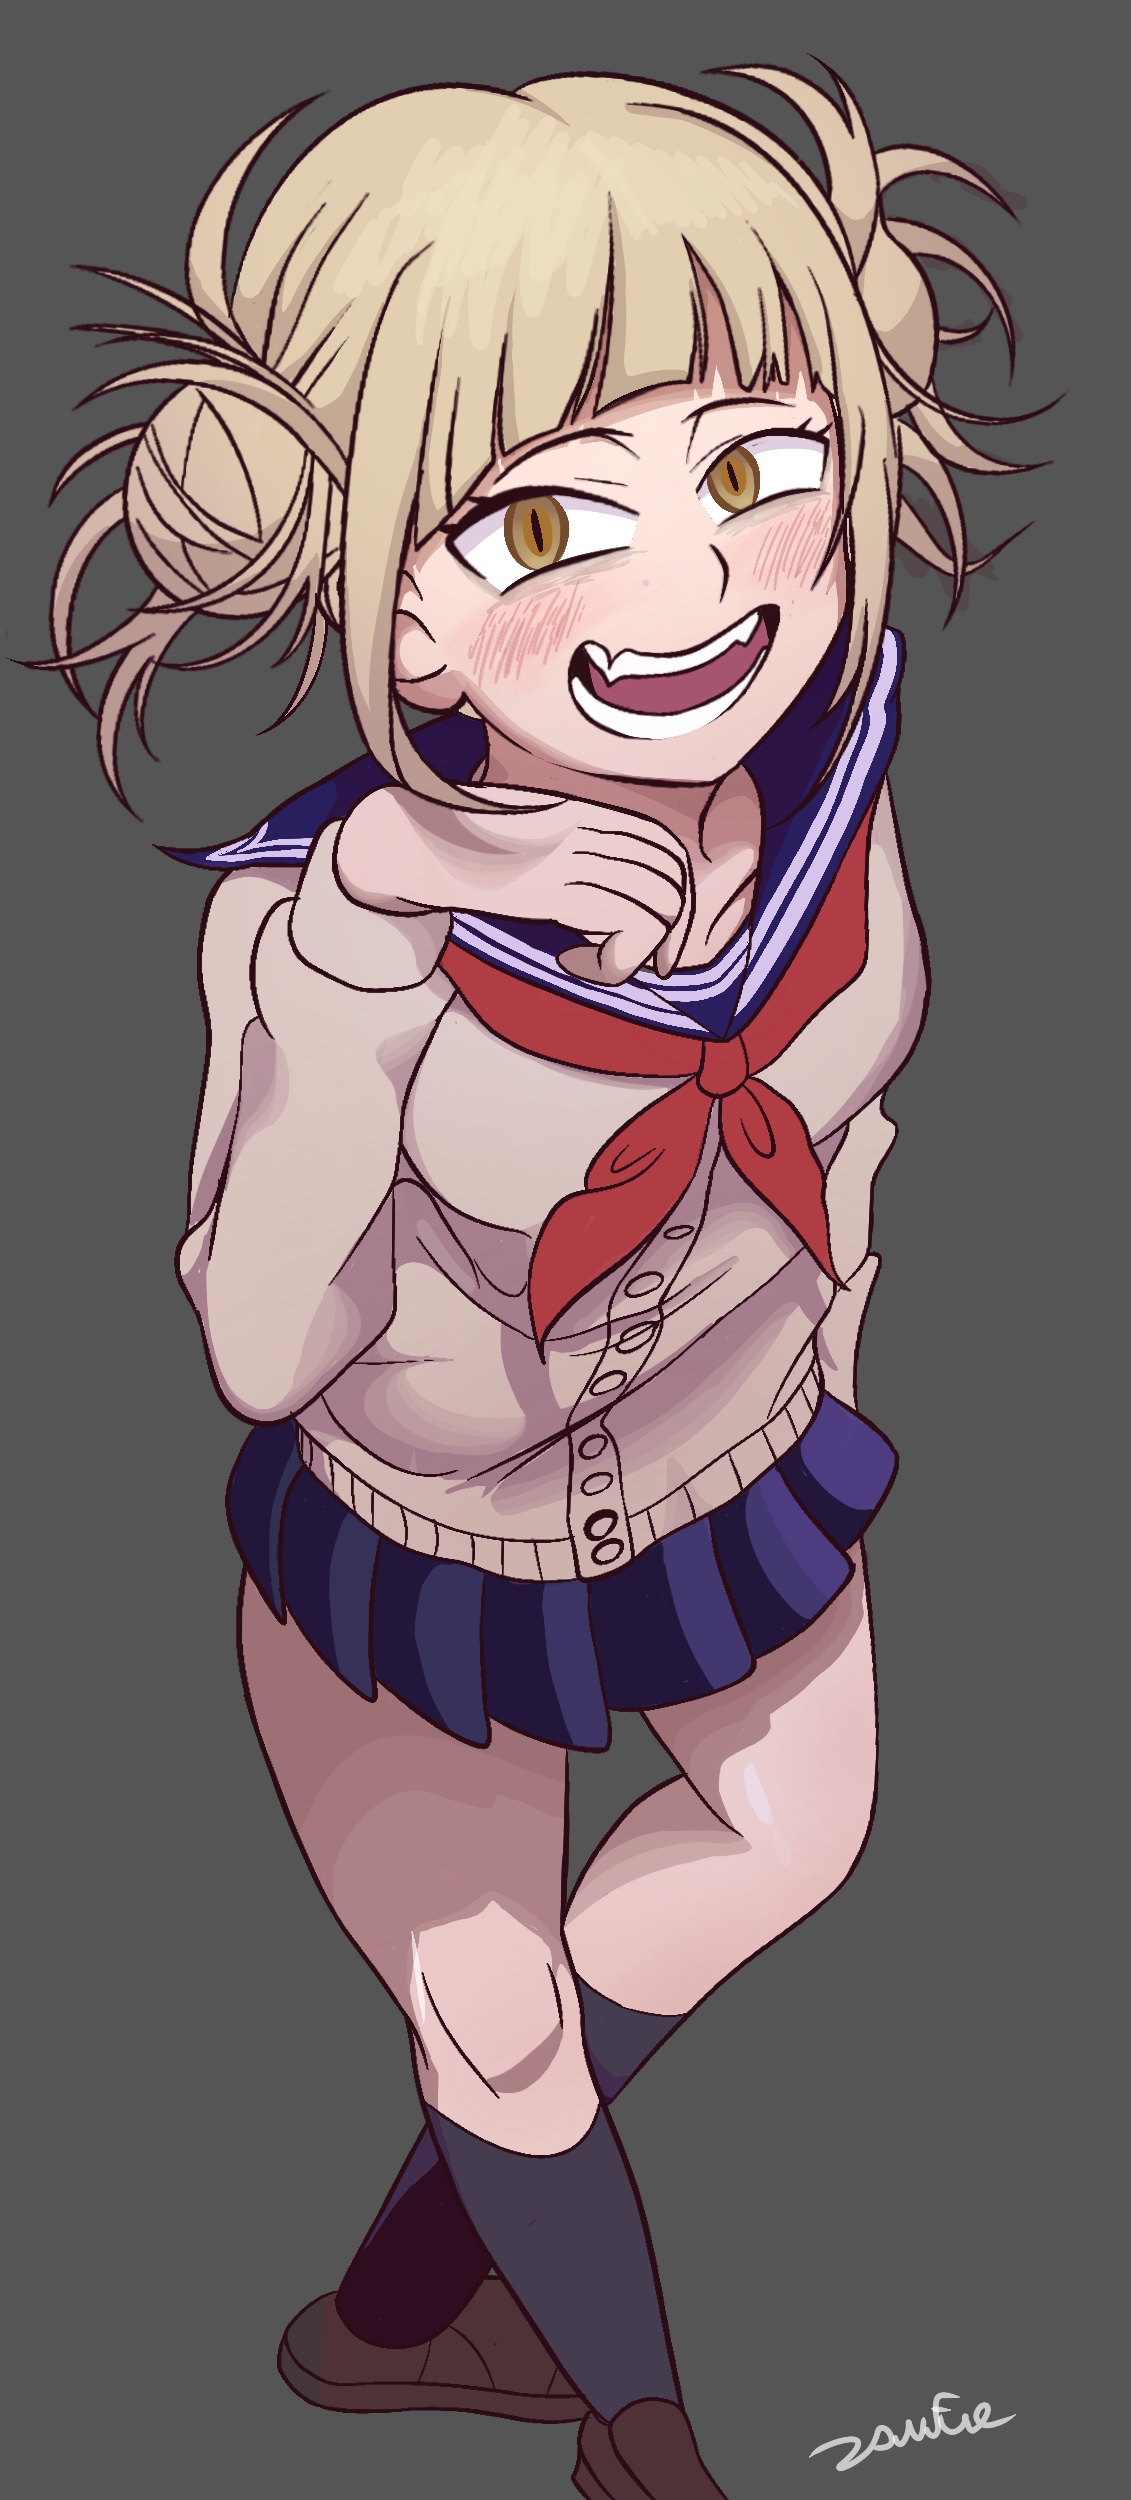 Himiko Toga by ZouFue on DeviantArt